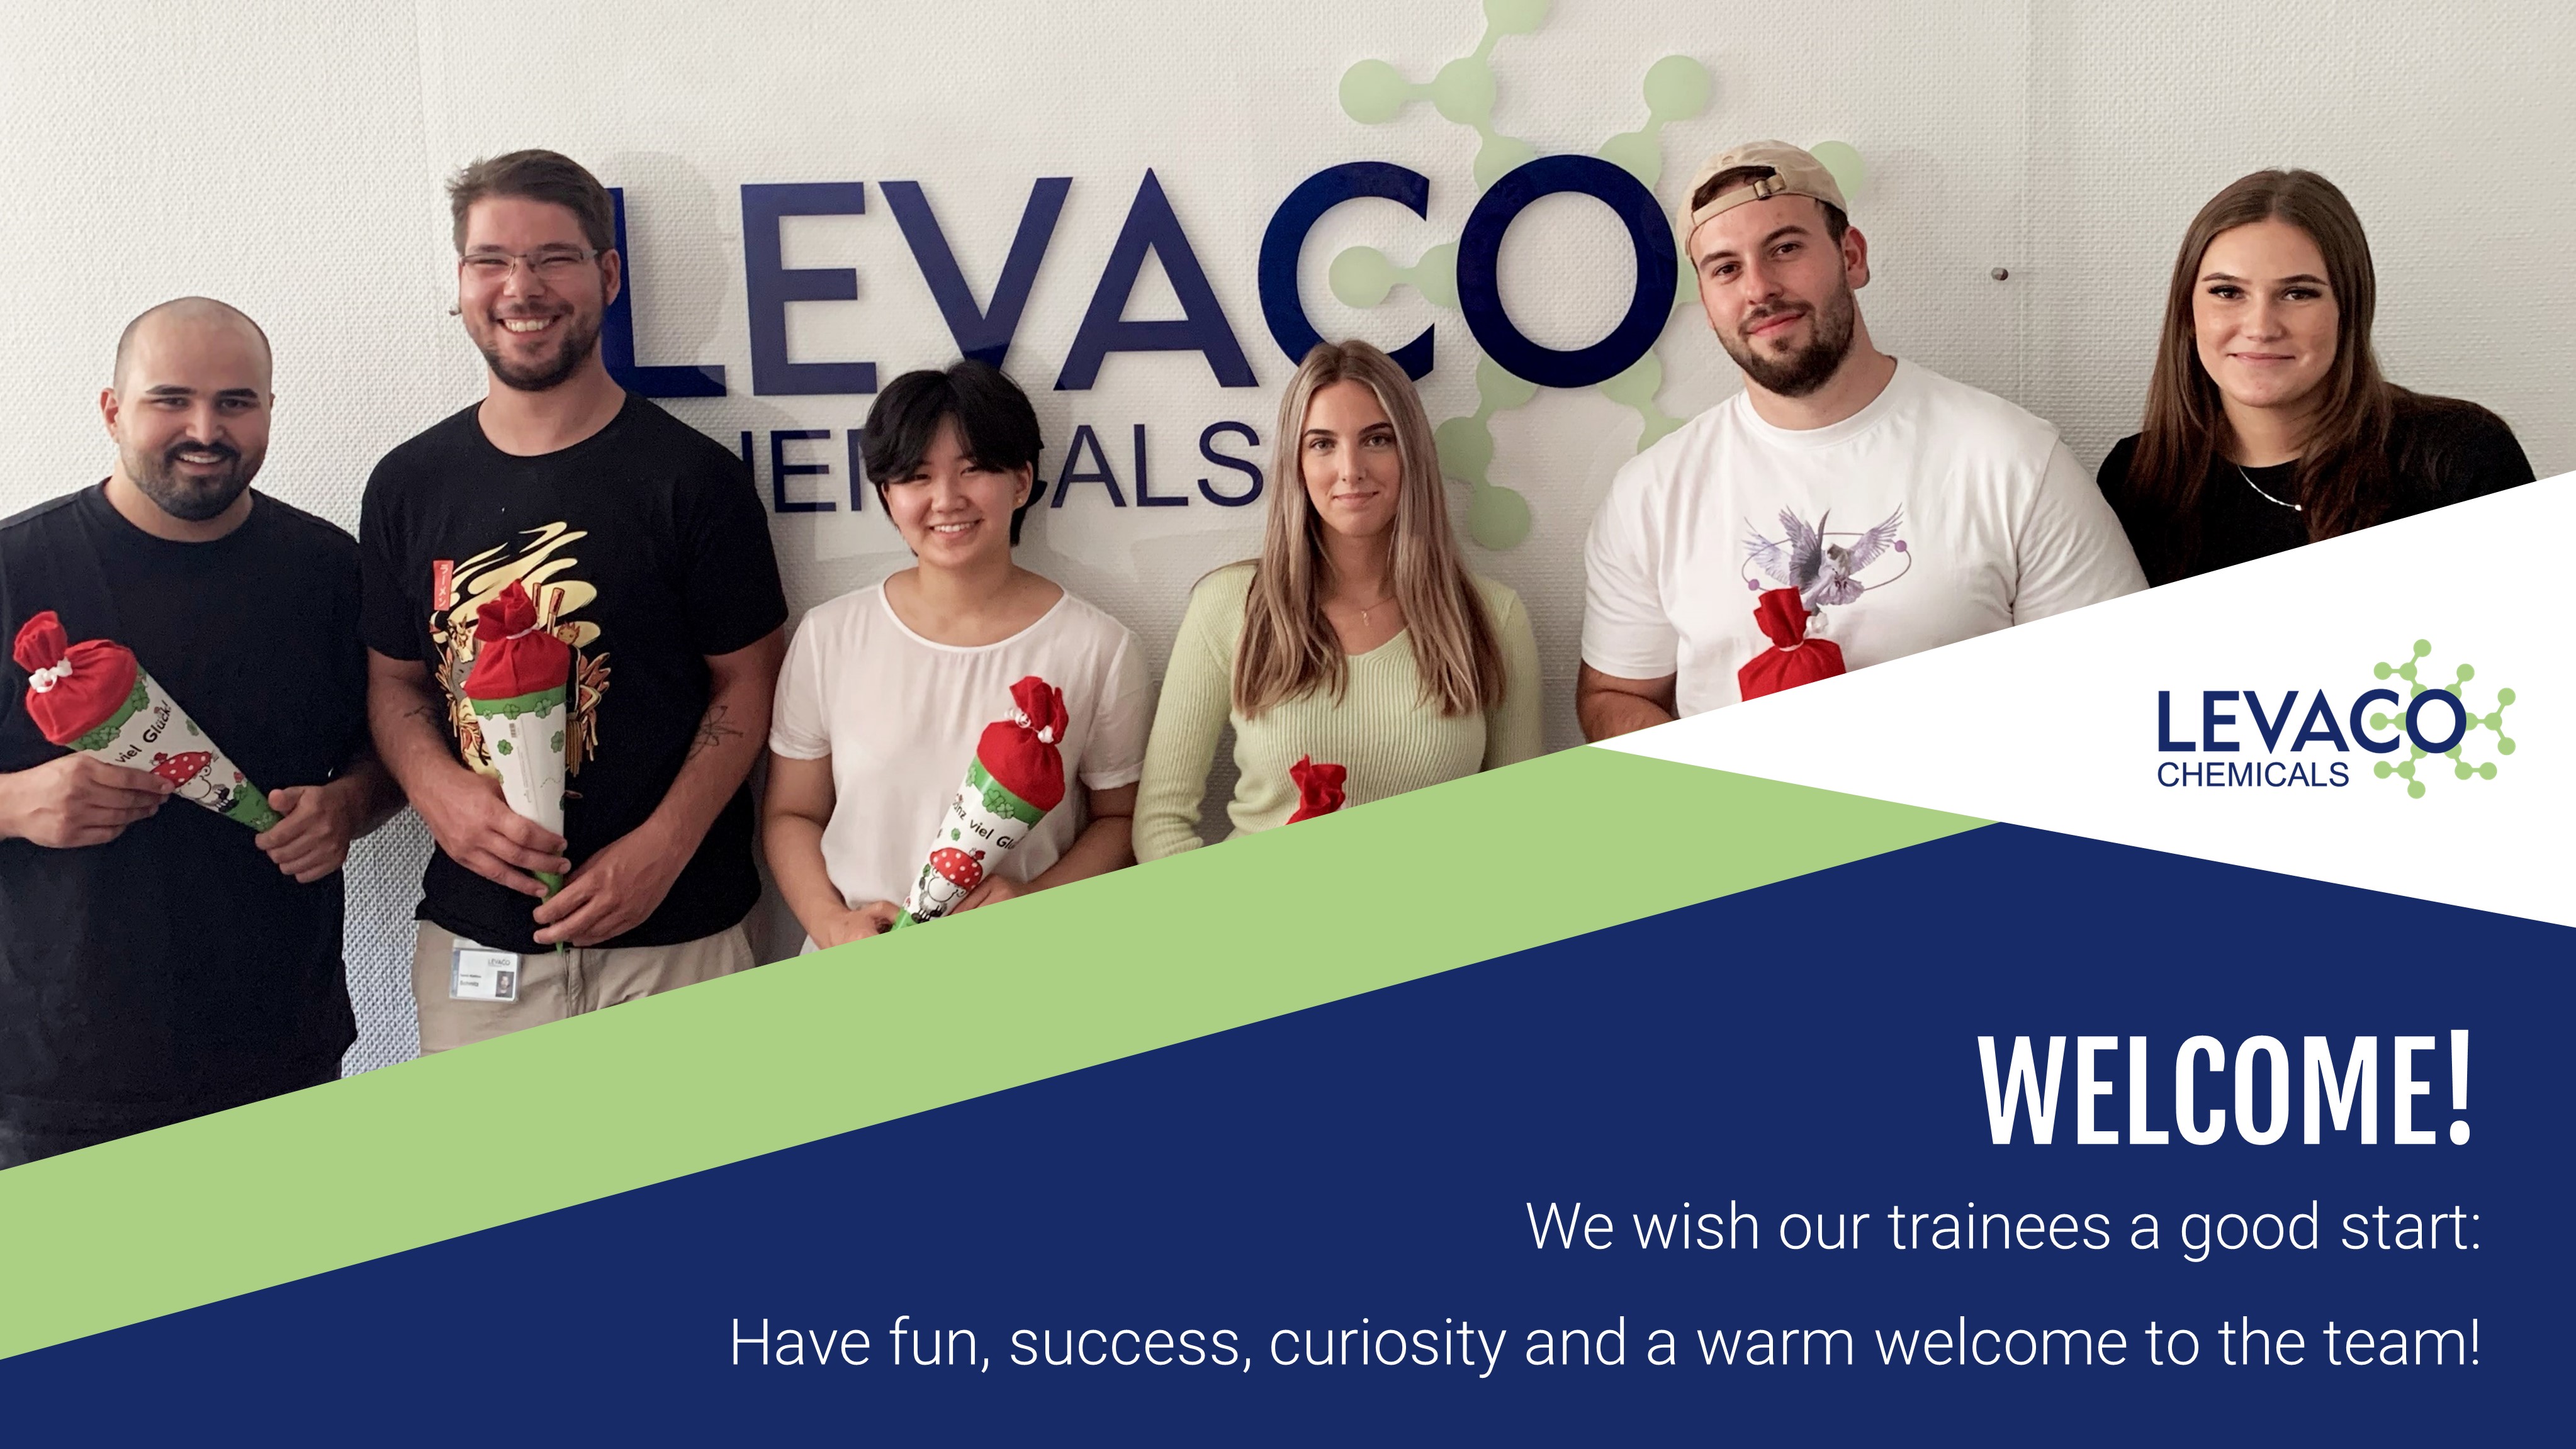 Our new trainees at LEVACO